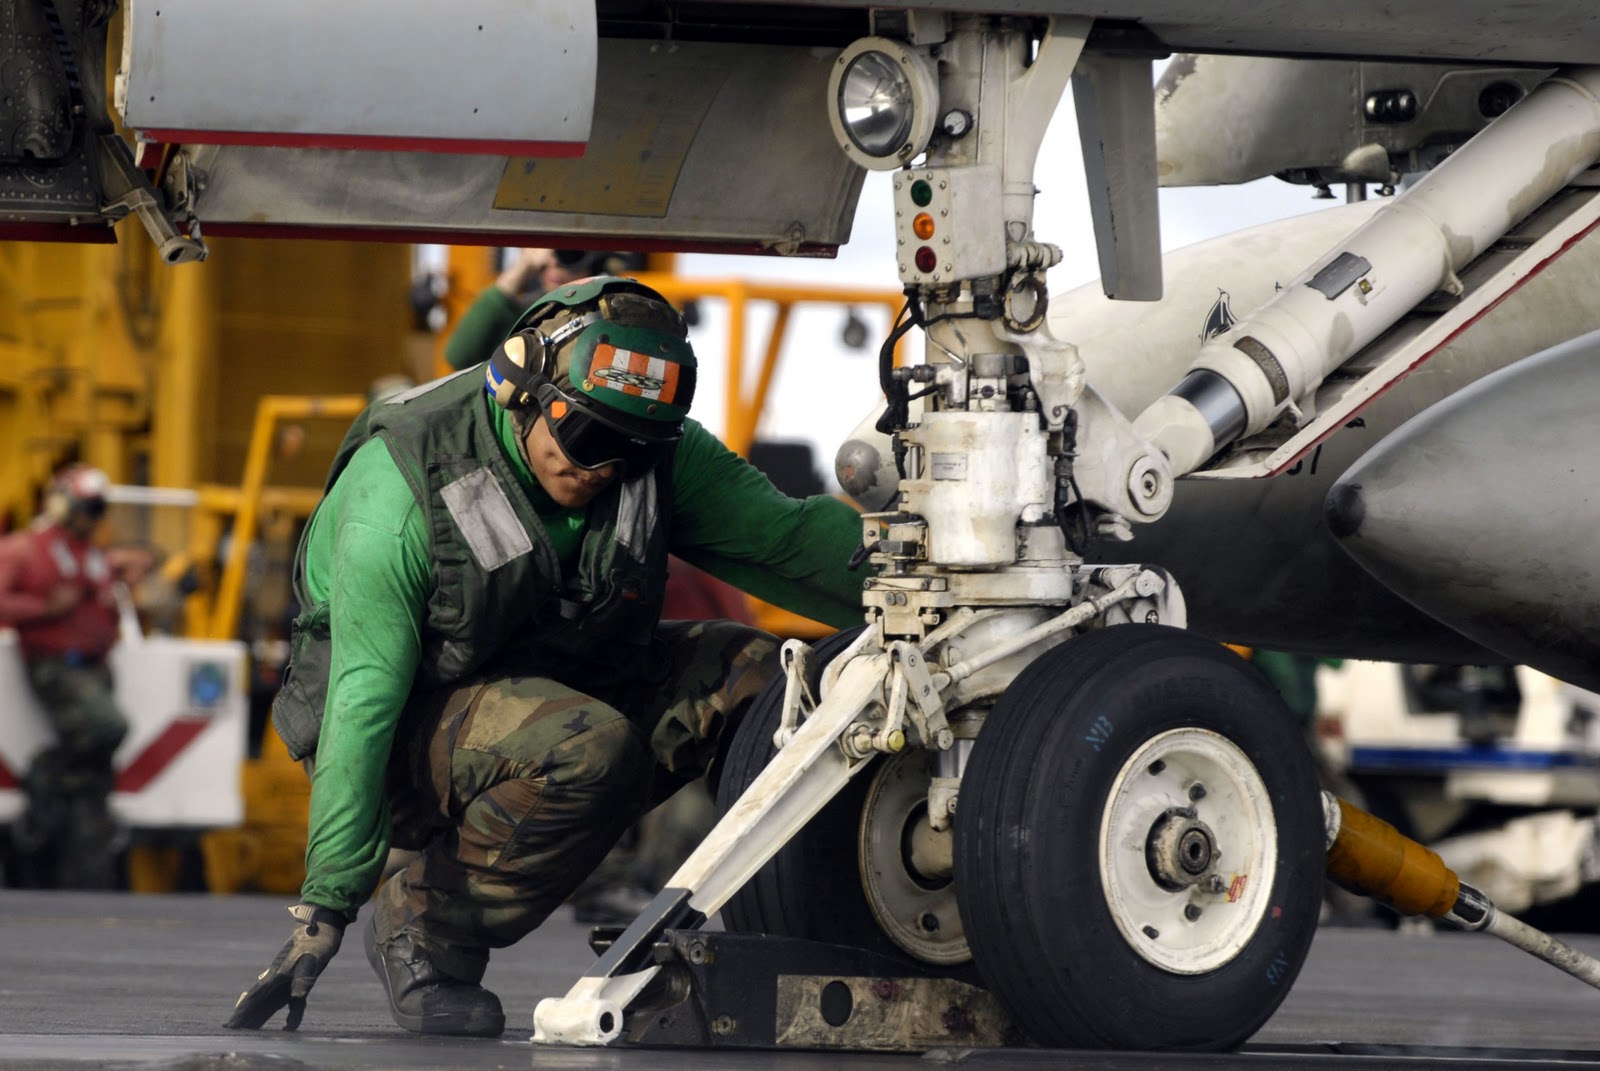 US_Navy_070910-N-7883G-009_Airman_Luis_Estrada%252C_topside_petty_officer_for_the_waist_catapult_aboard_USS_Kitty_Hawk_%2528CV_63%2529%252C_verifies_that_the_holdback_bar_is_in_place_prior_to_launch.jpg